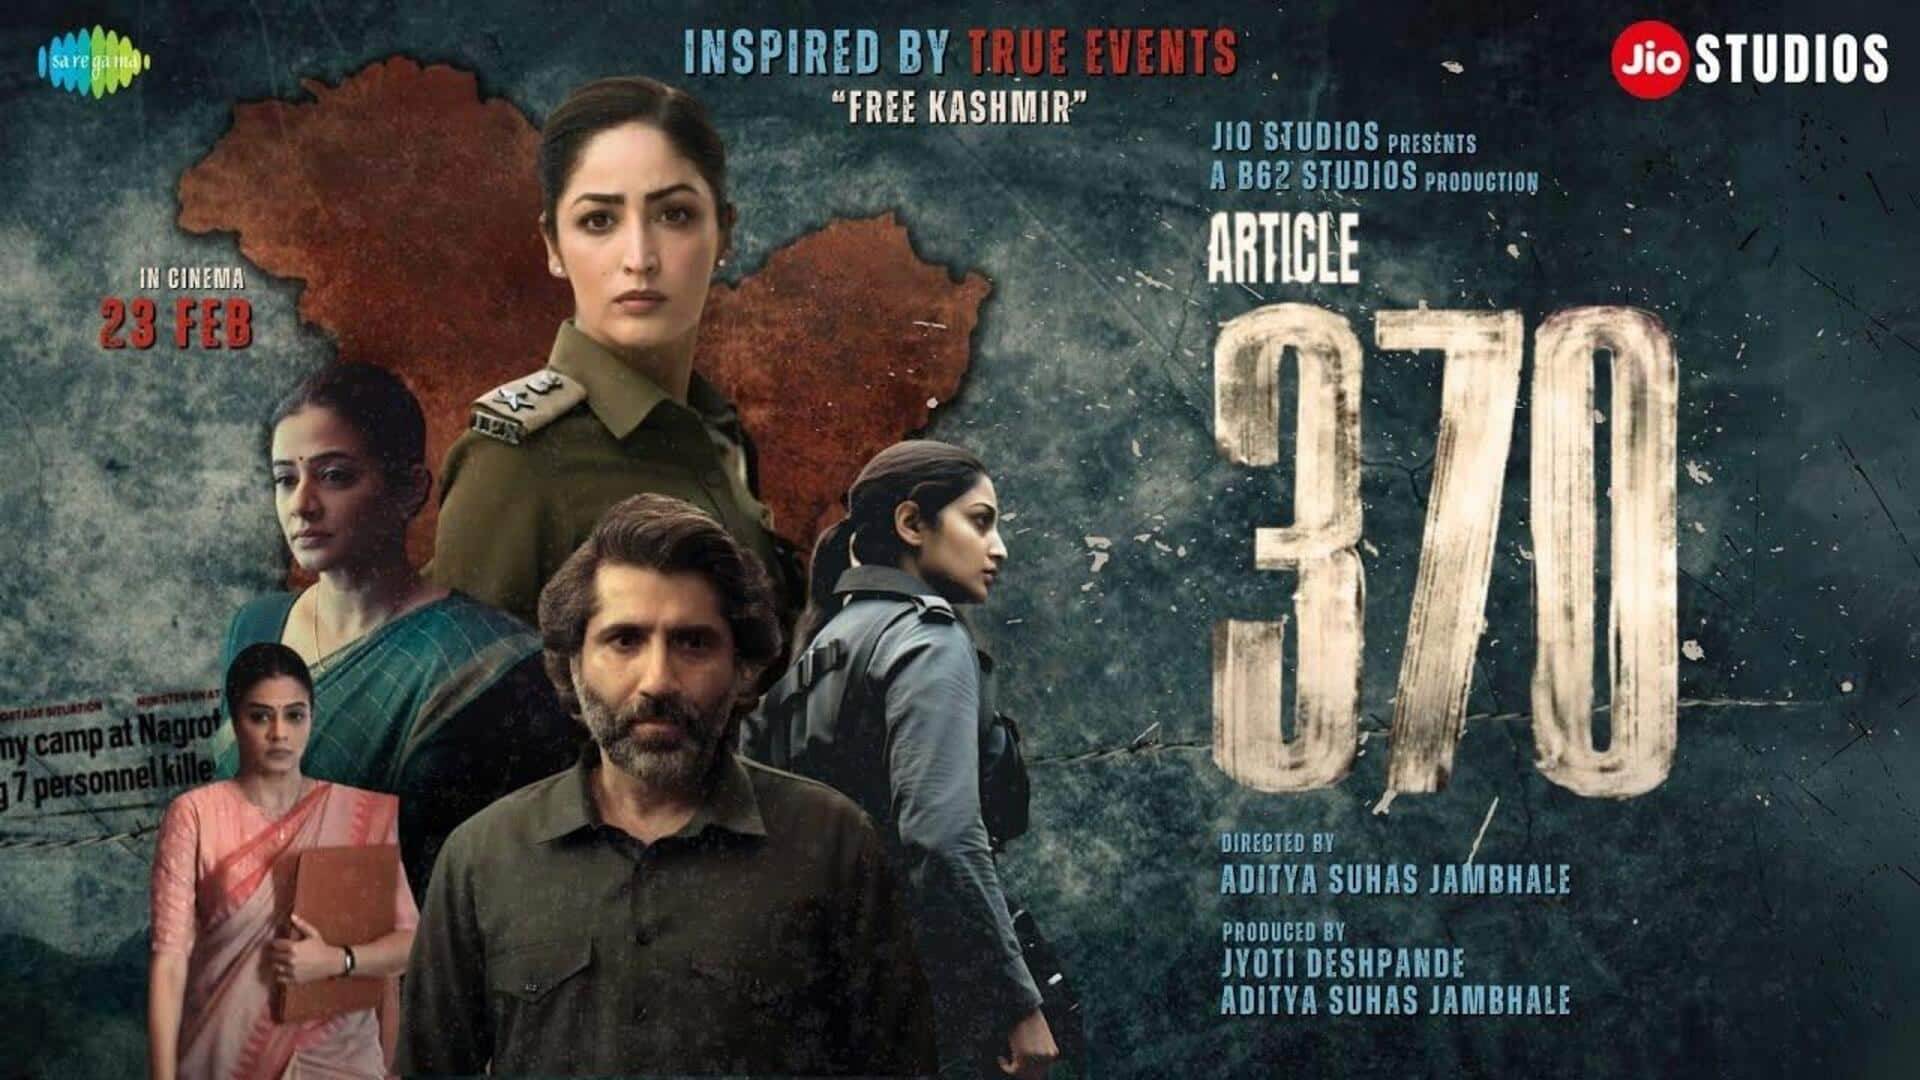 Box office: Yami Gautam's 'Article 370' witnesses growth in collection